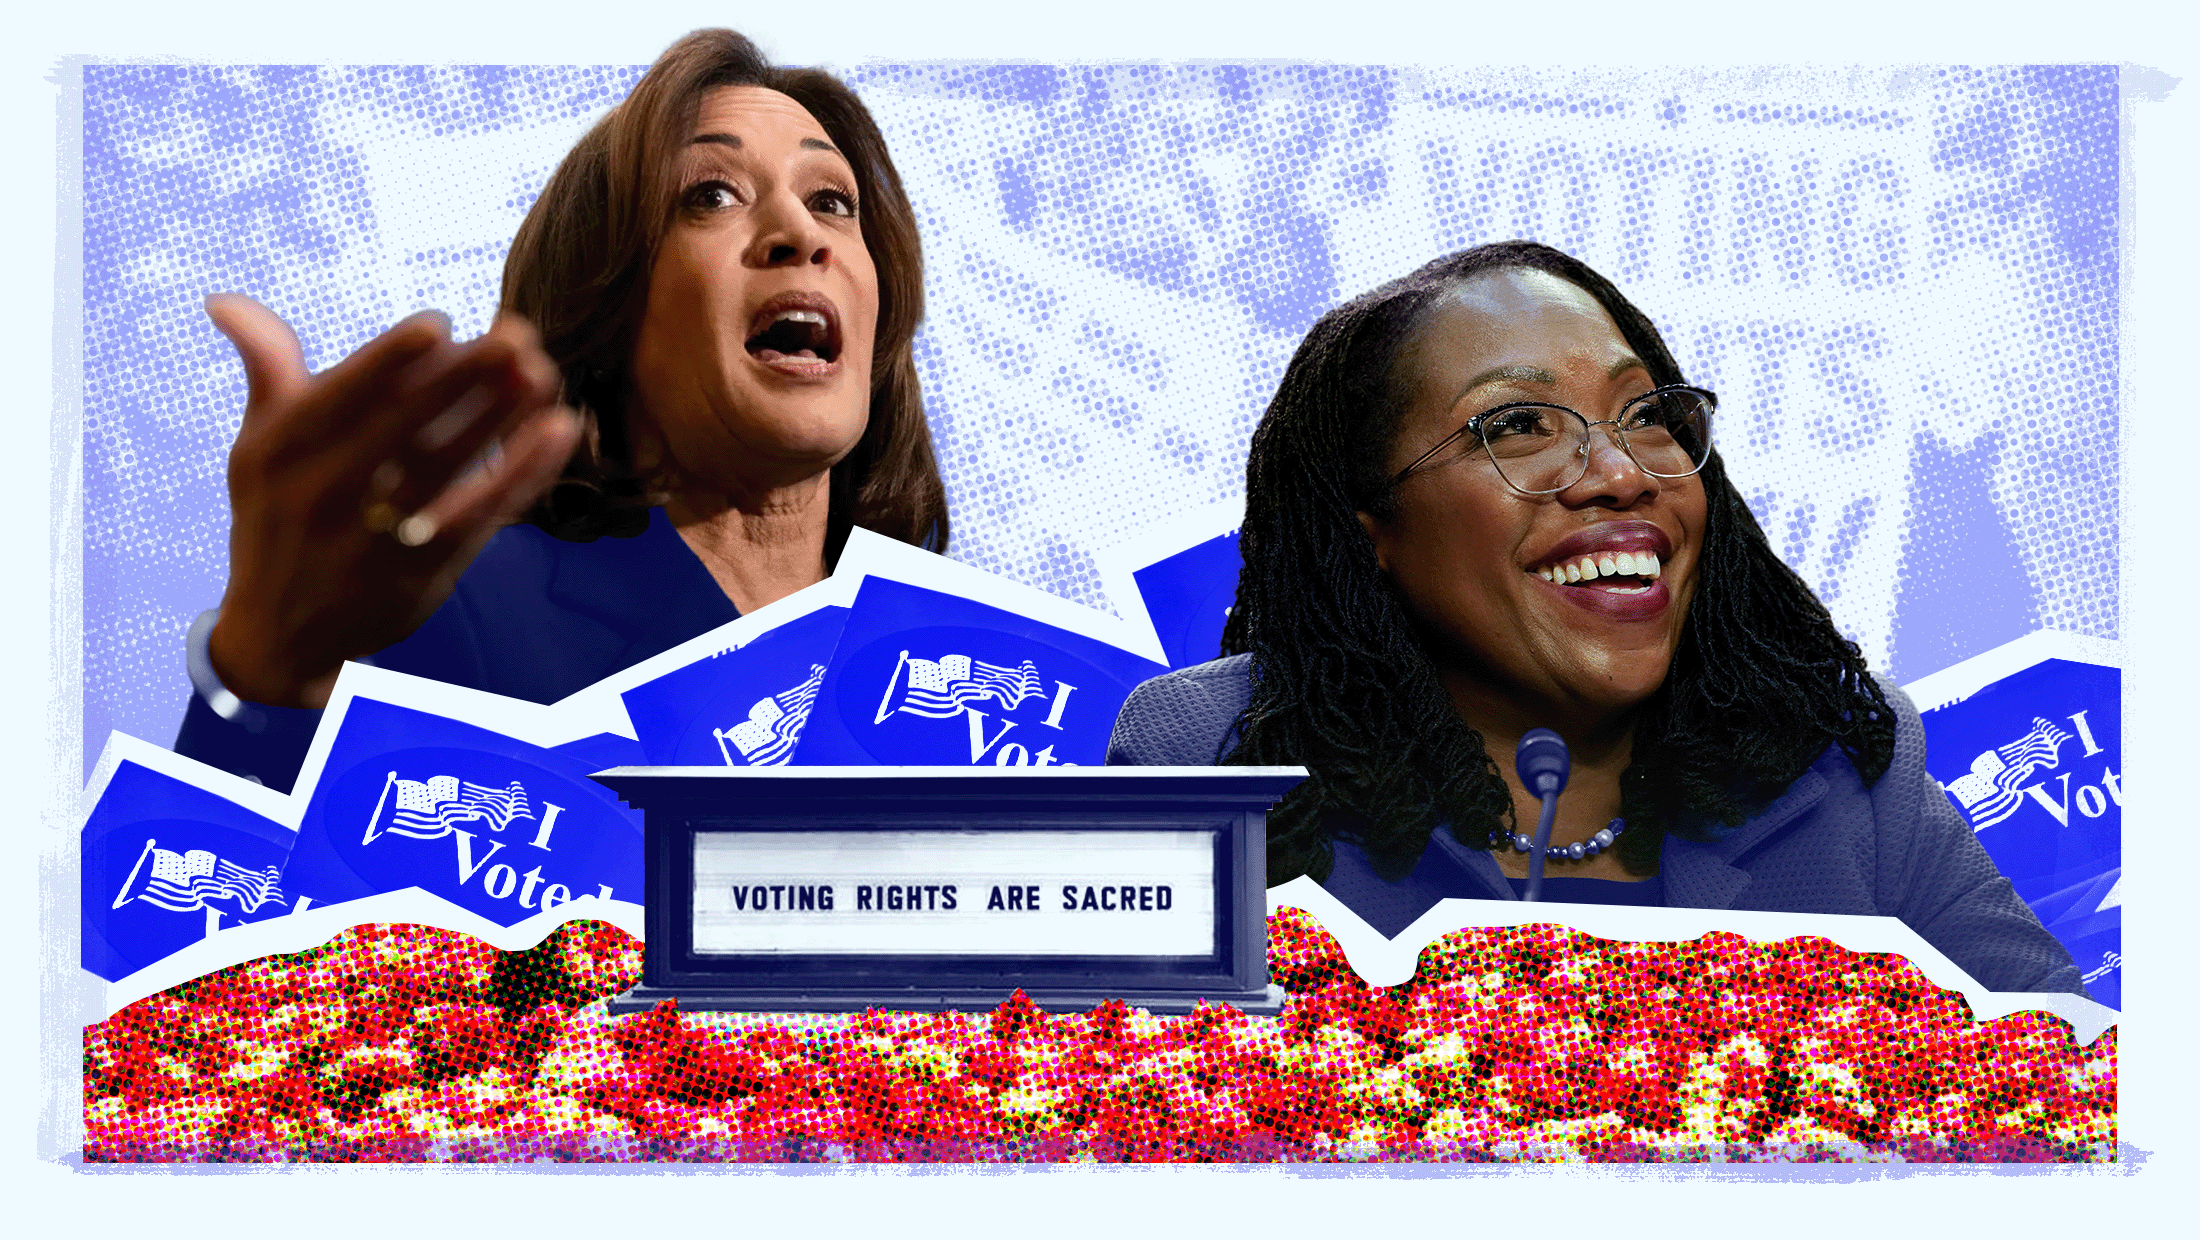 Blue background with images of Vice President Kamala Harris and Supreme Court Justice Ketanji Brown Jackson with blue "I Voted" signs and a sign that reads "ALL VOTES ARE SACRED"